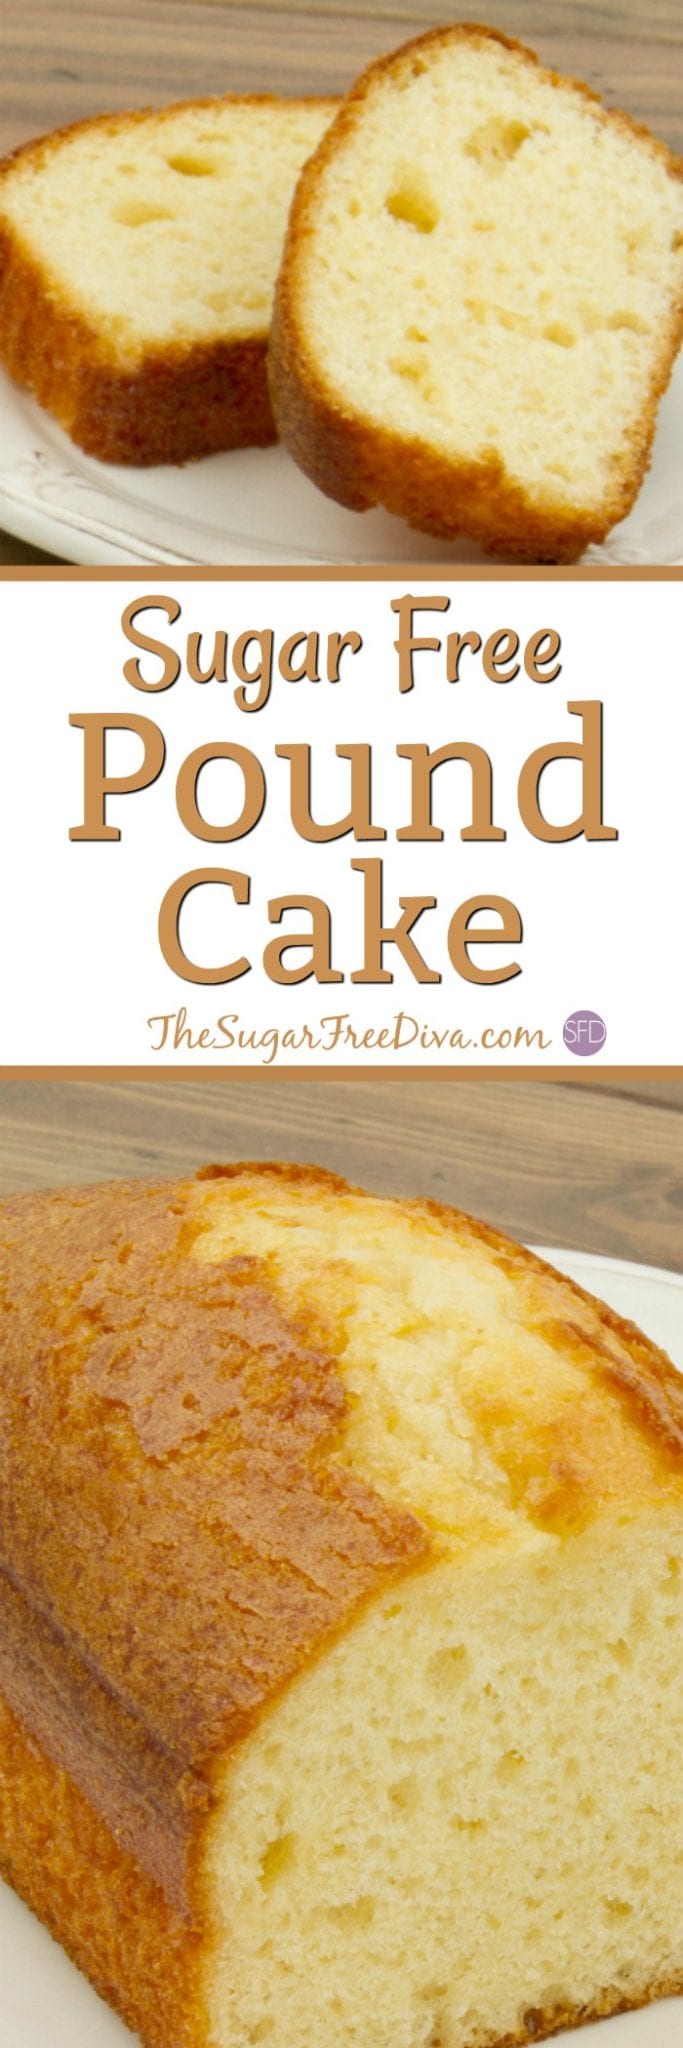 Check out this recipe for How to Make Sugar Free Pound Cake